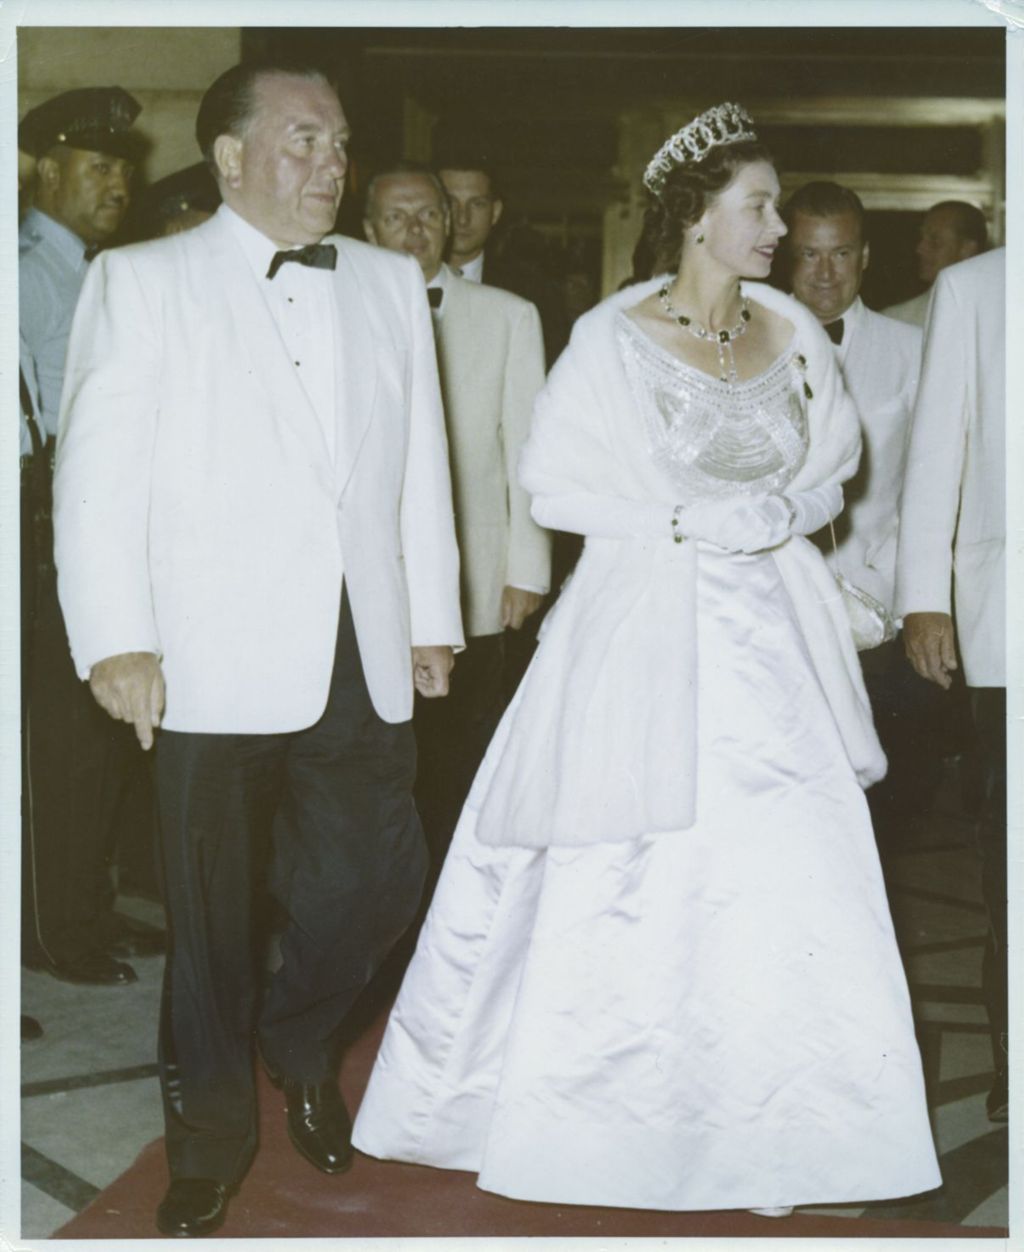 Miniature of Richard J. Daley and Queen Elizabeth II at an evening banquet